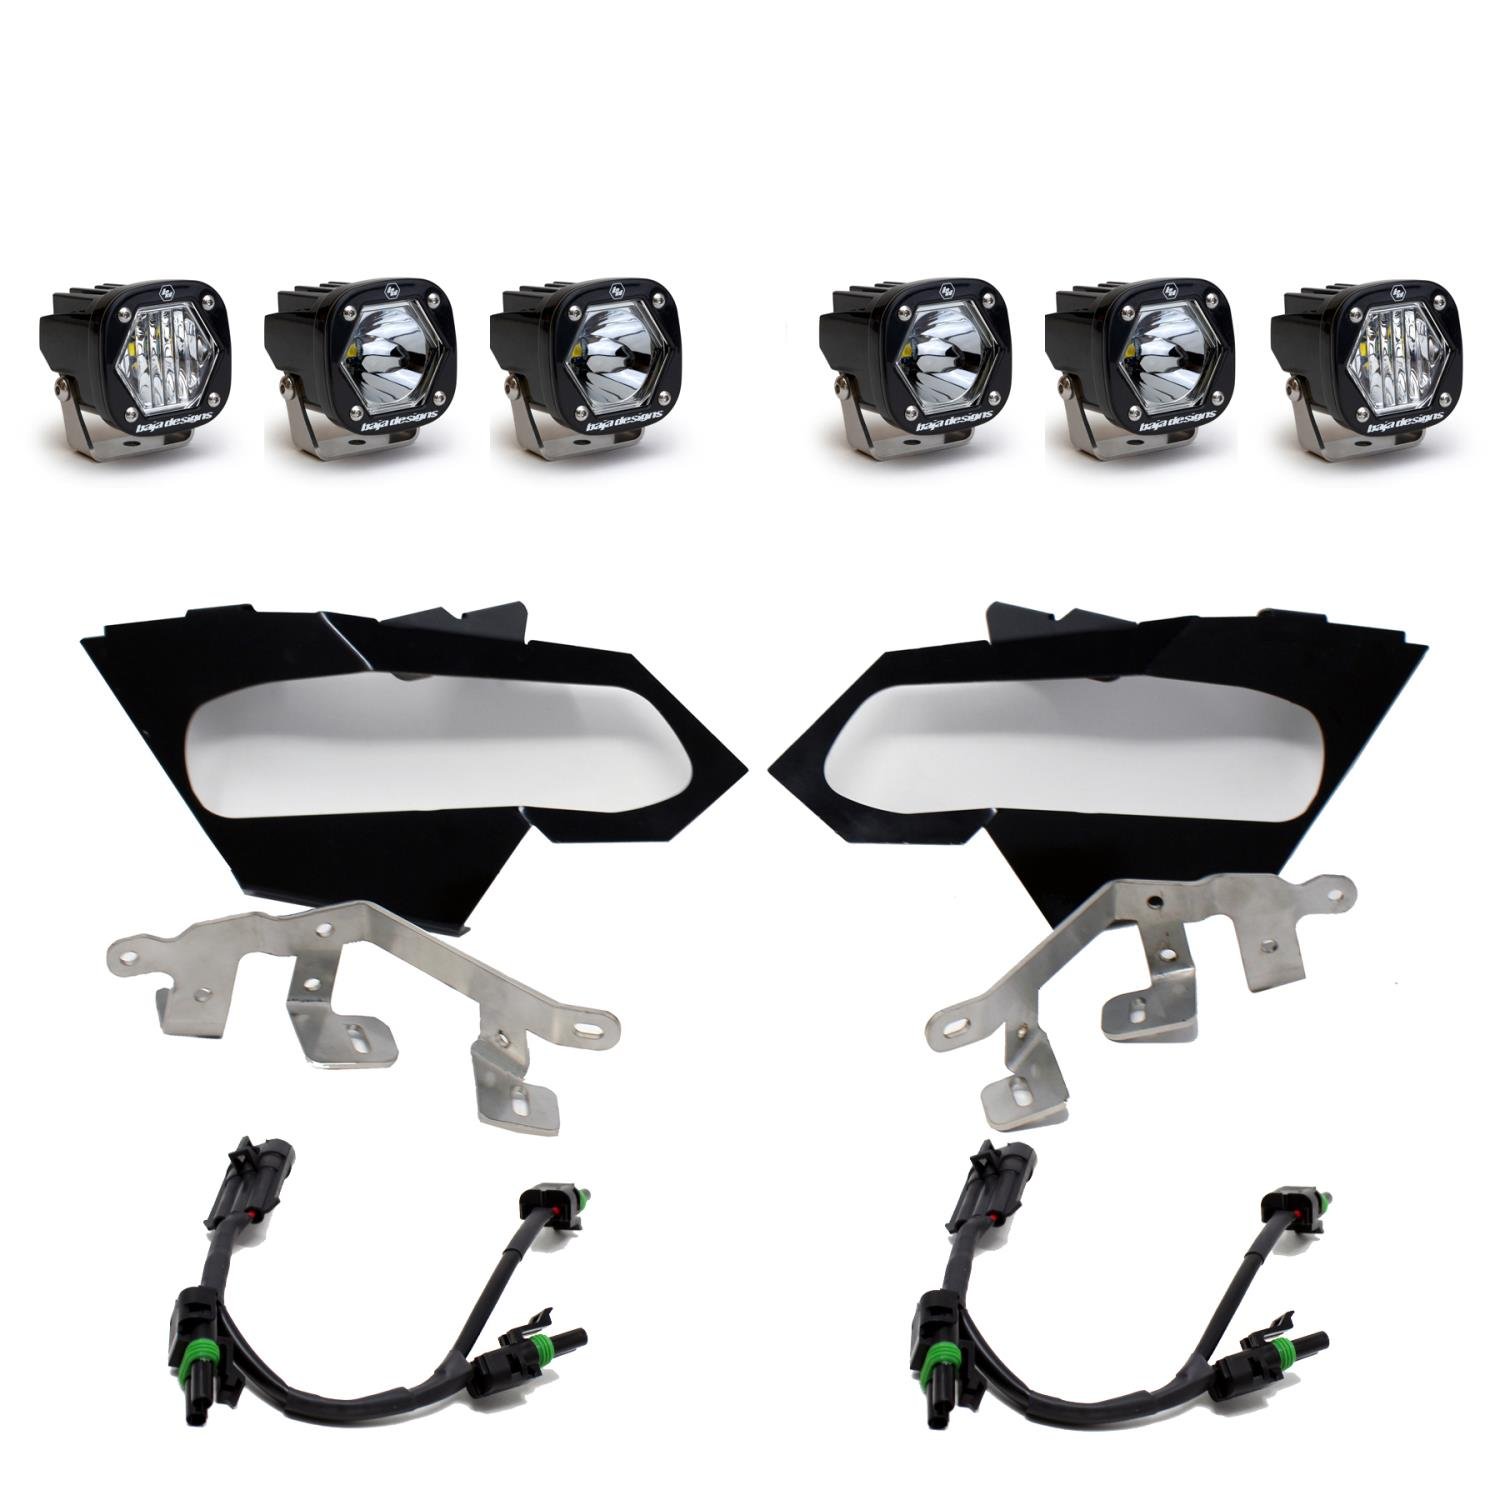 S1 Triple LED Headlight Kit for 2017-2021 Can-Am